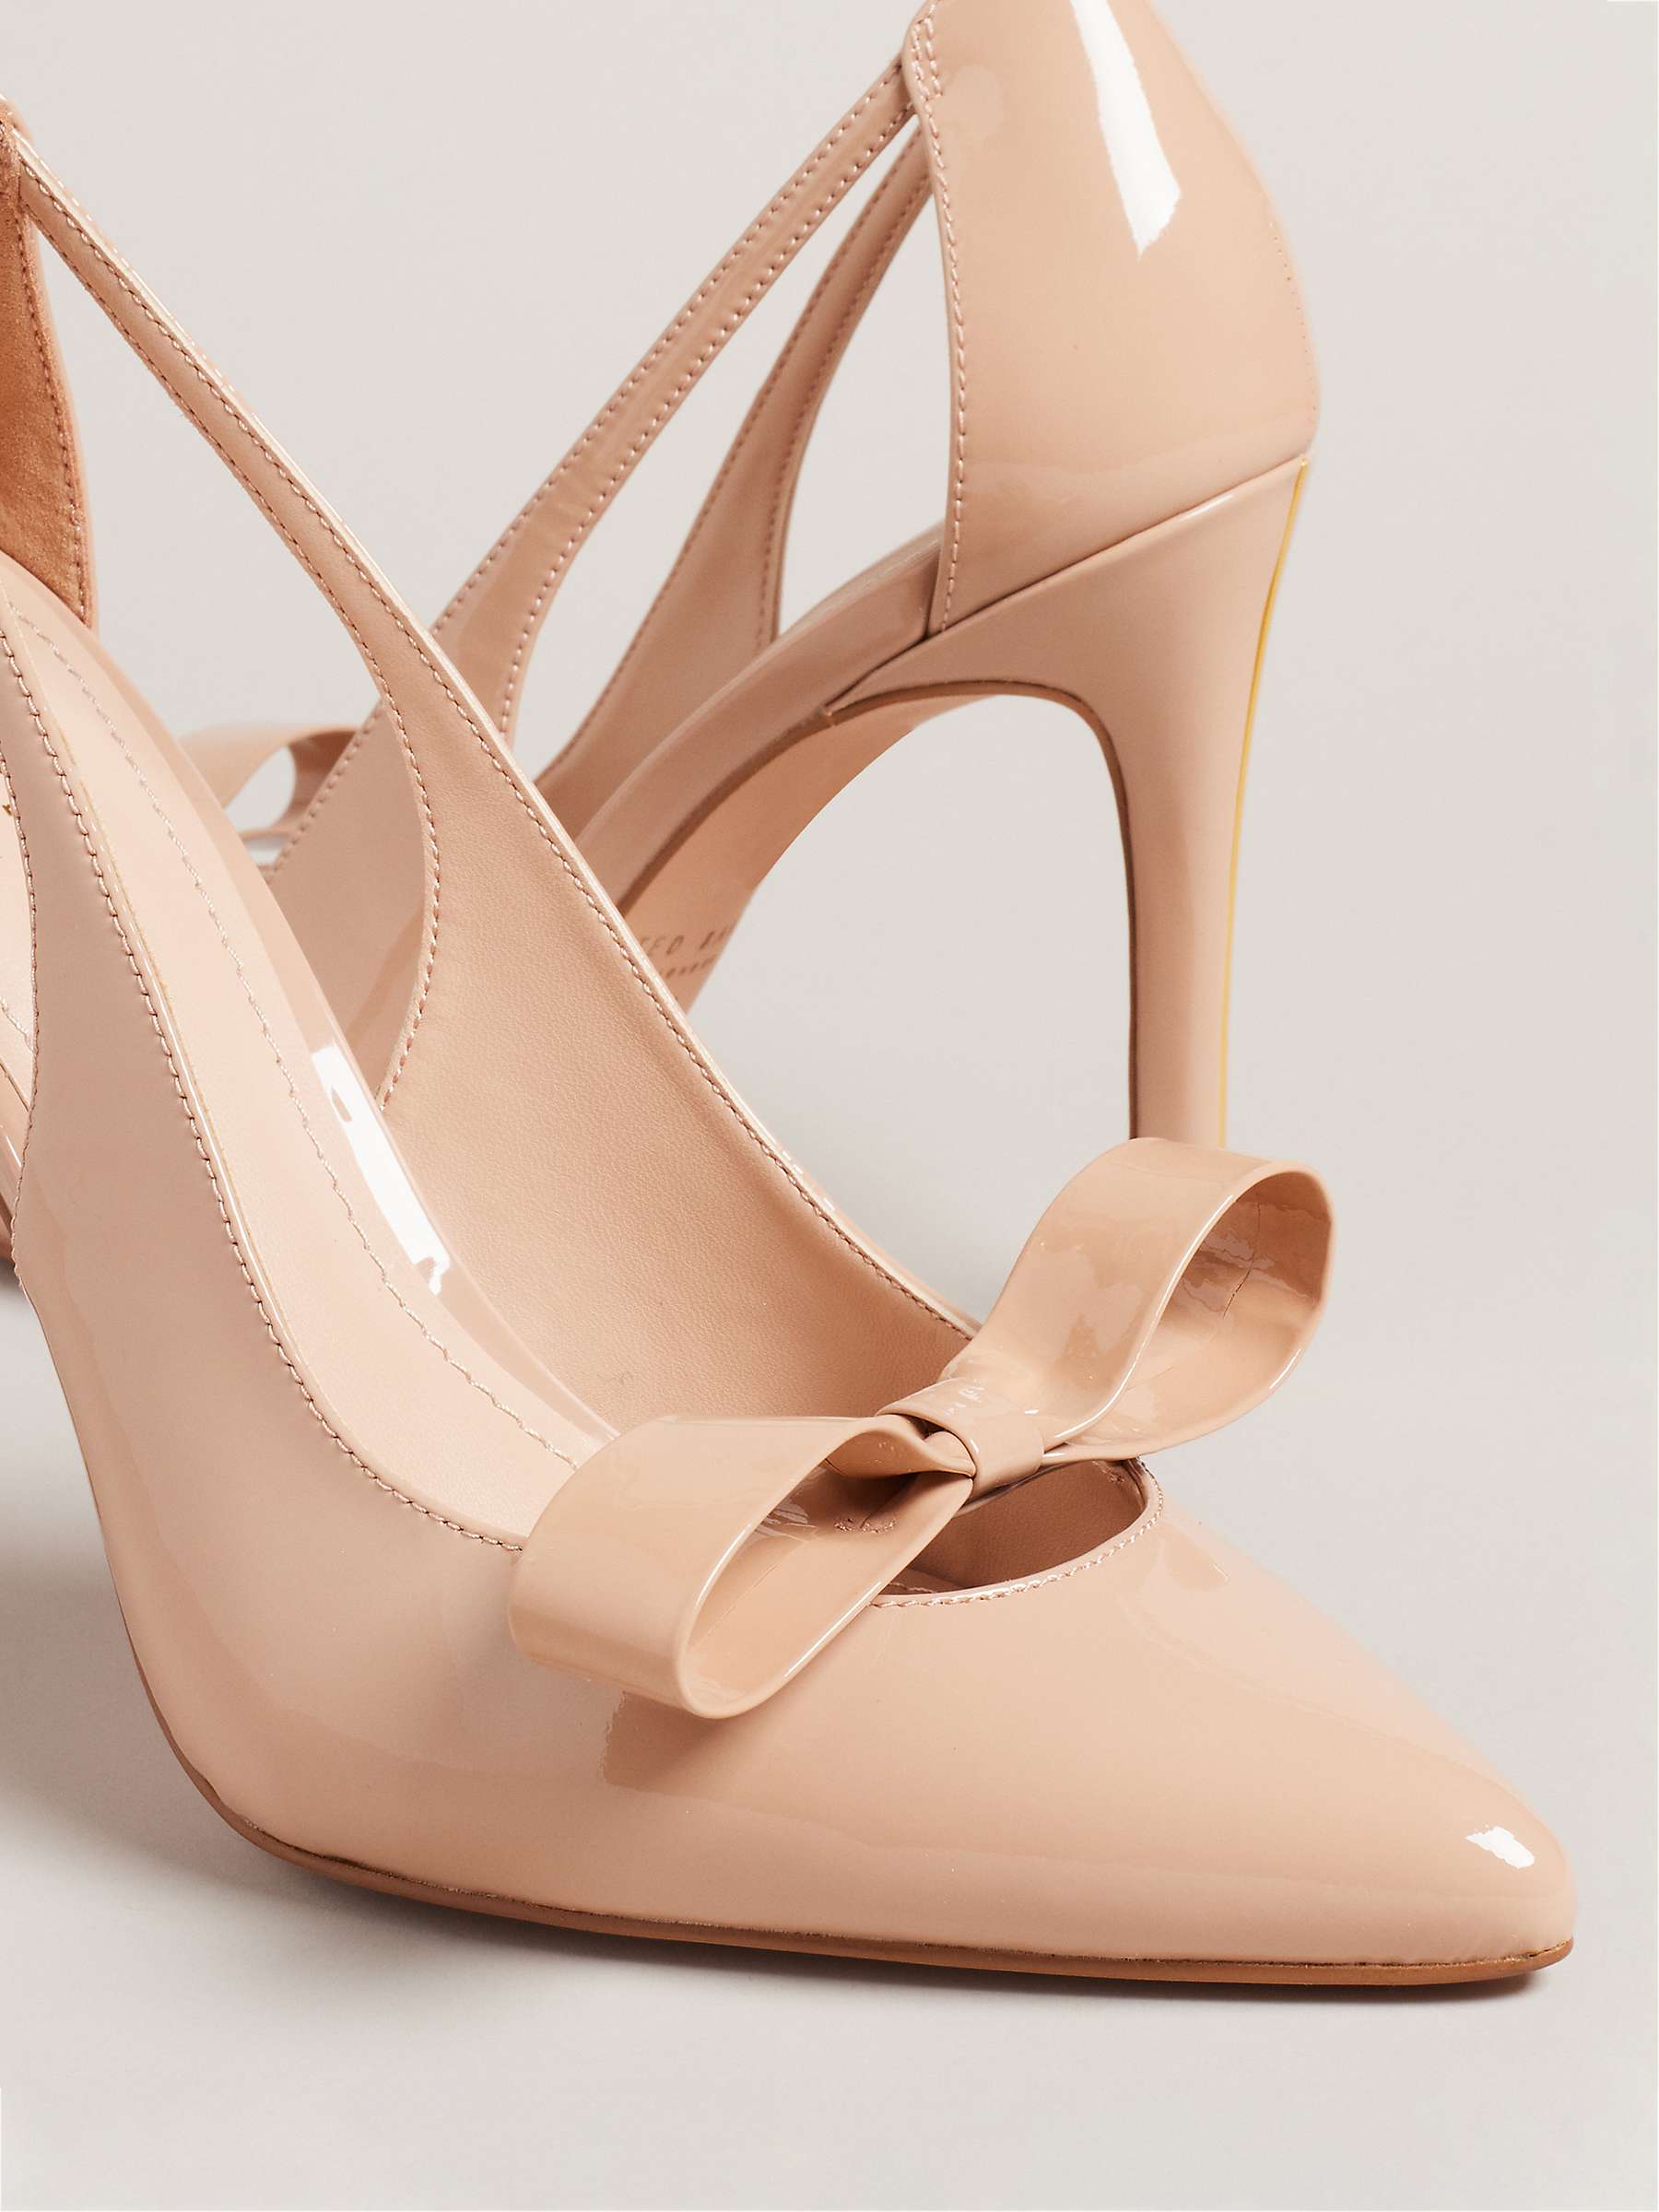 Buy Ted Baker Orliney Patent Bow Cut Out Heeled Court Shoes Online at johnlewis.com